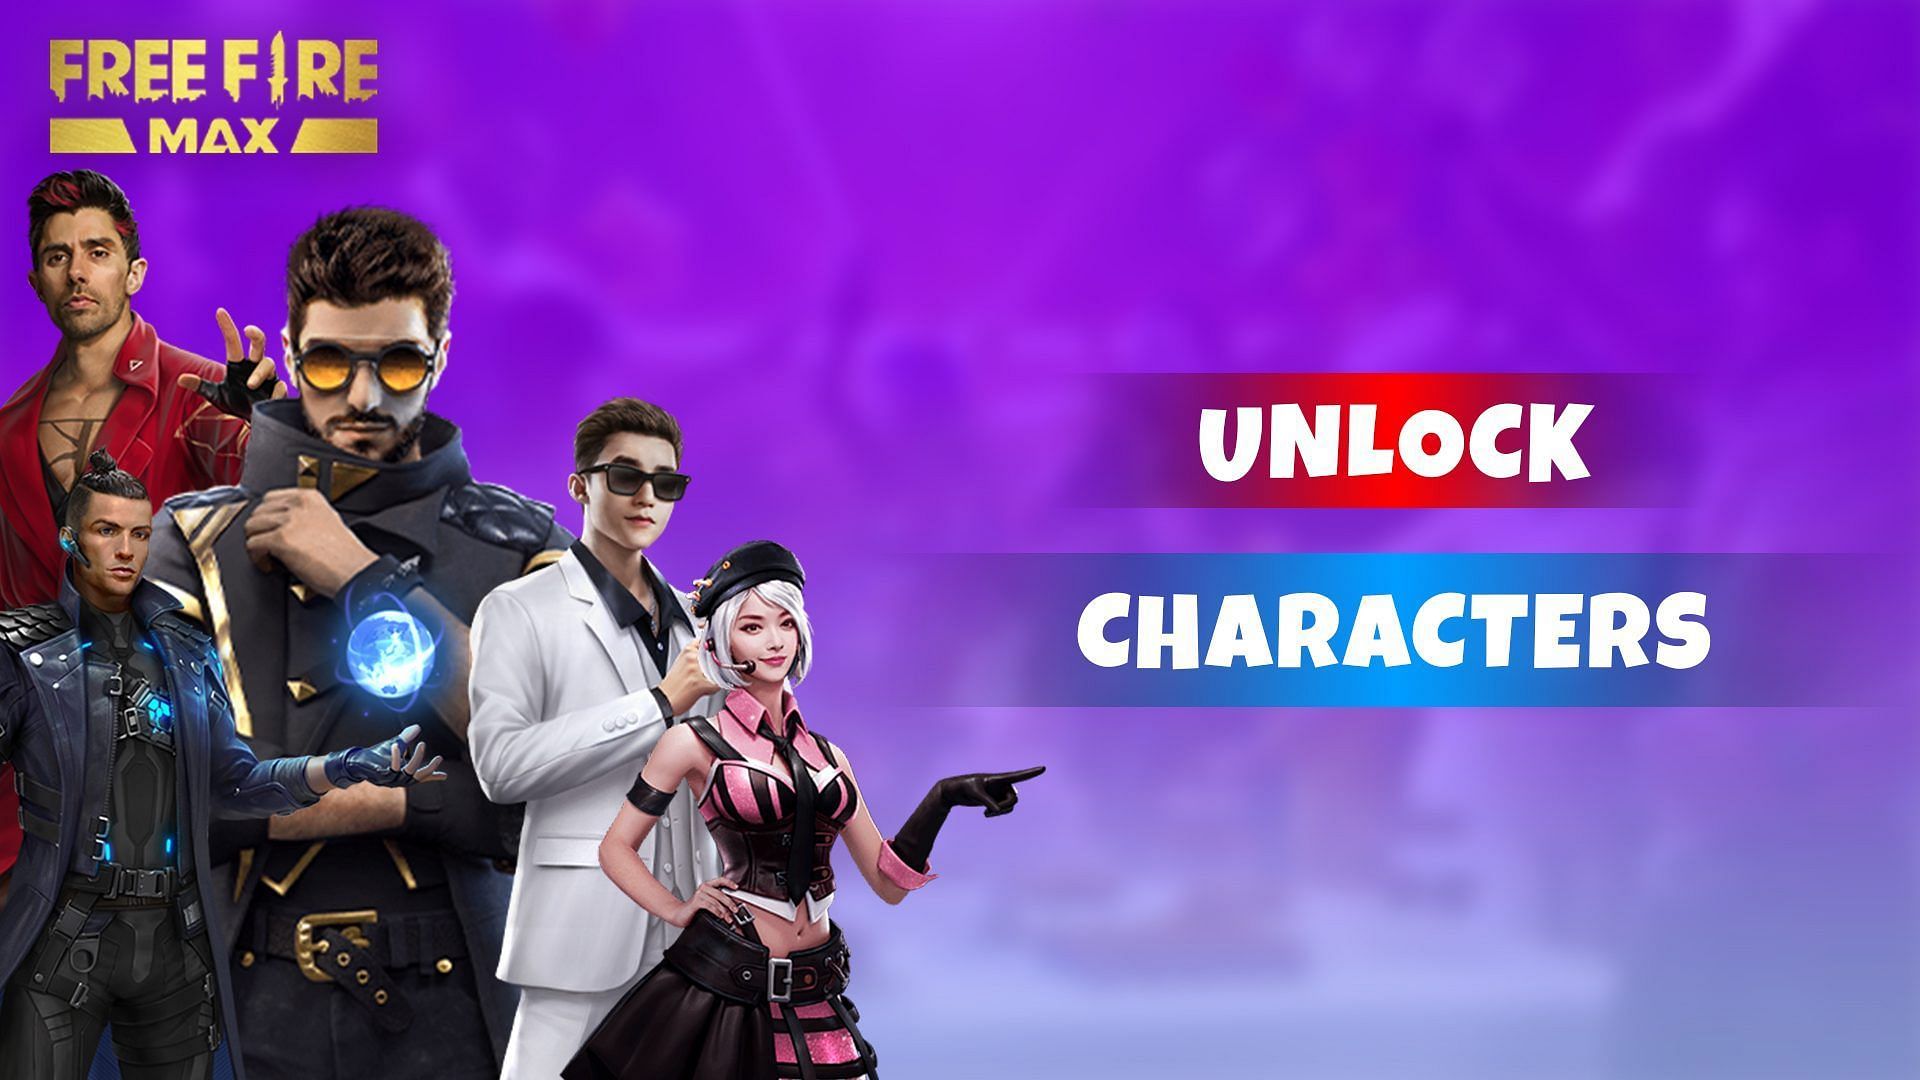 Gamers should quickly unlock characters using the new system (Image via Sportskeeda)